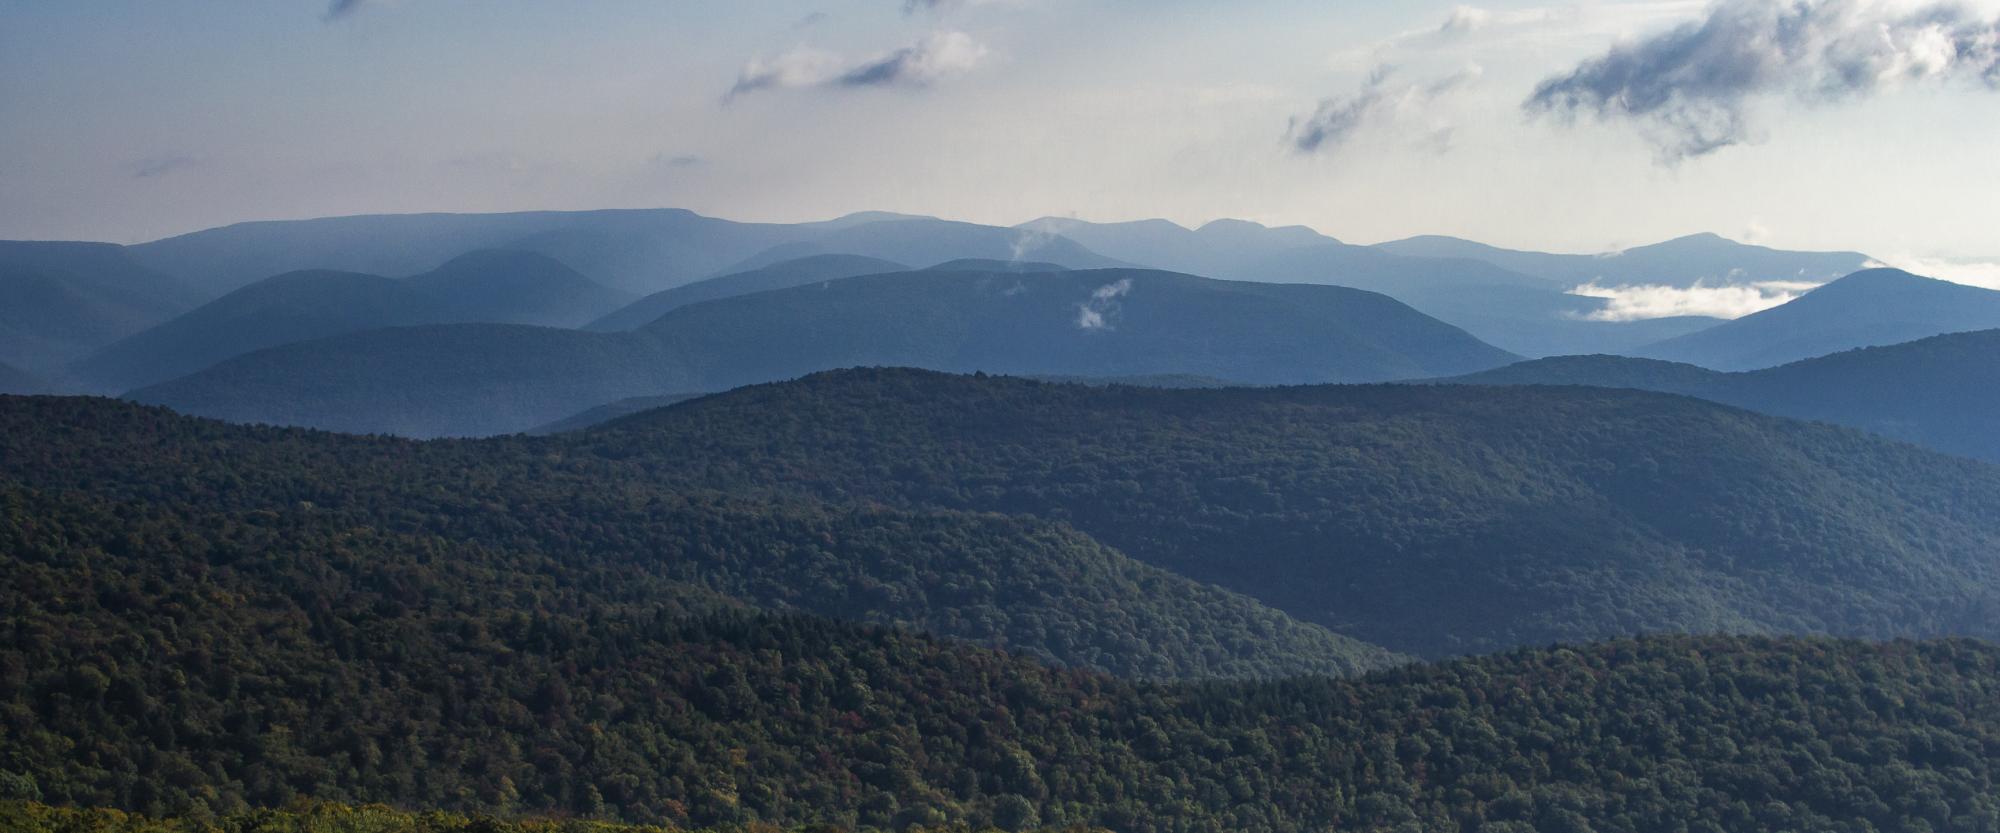 View from the Catskill's Giant Ledge. Photo by Steve Aaron Photography.